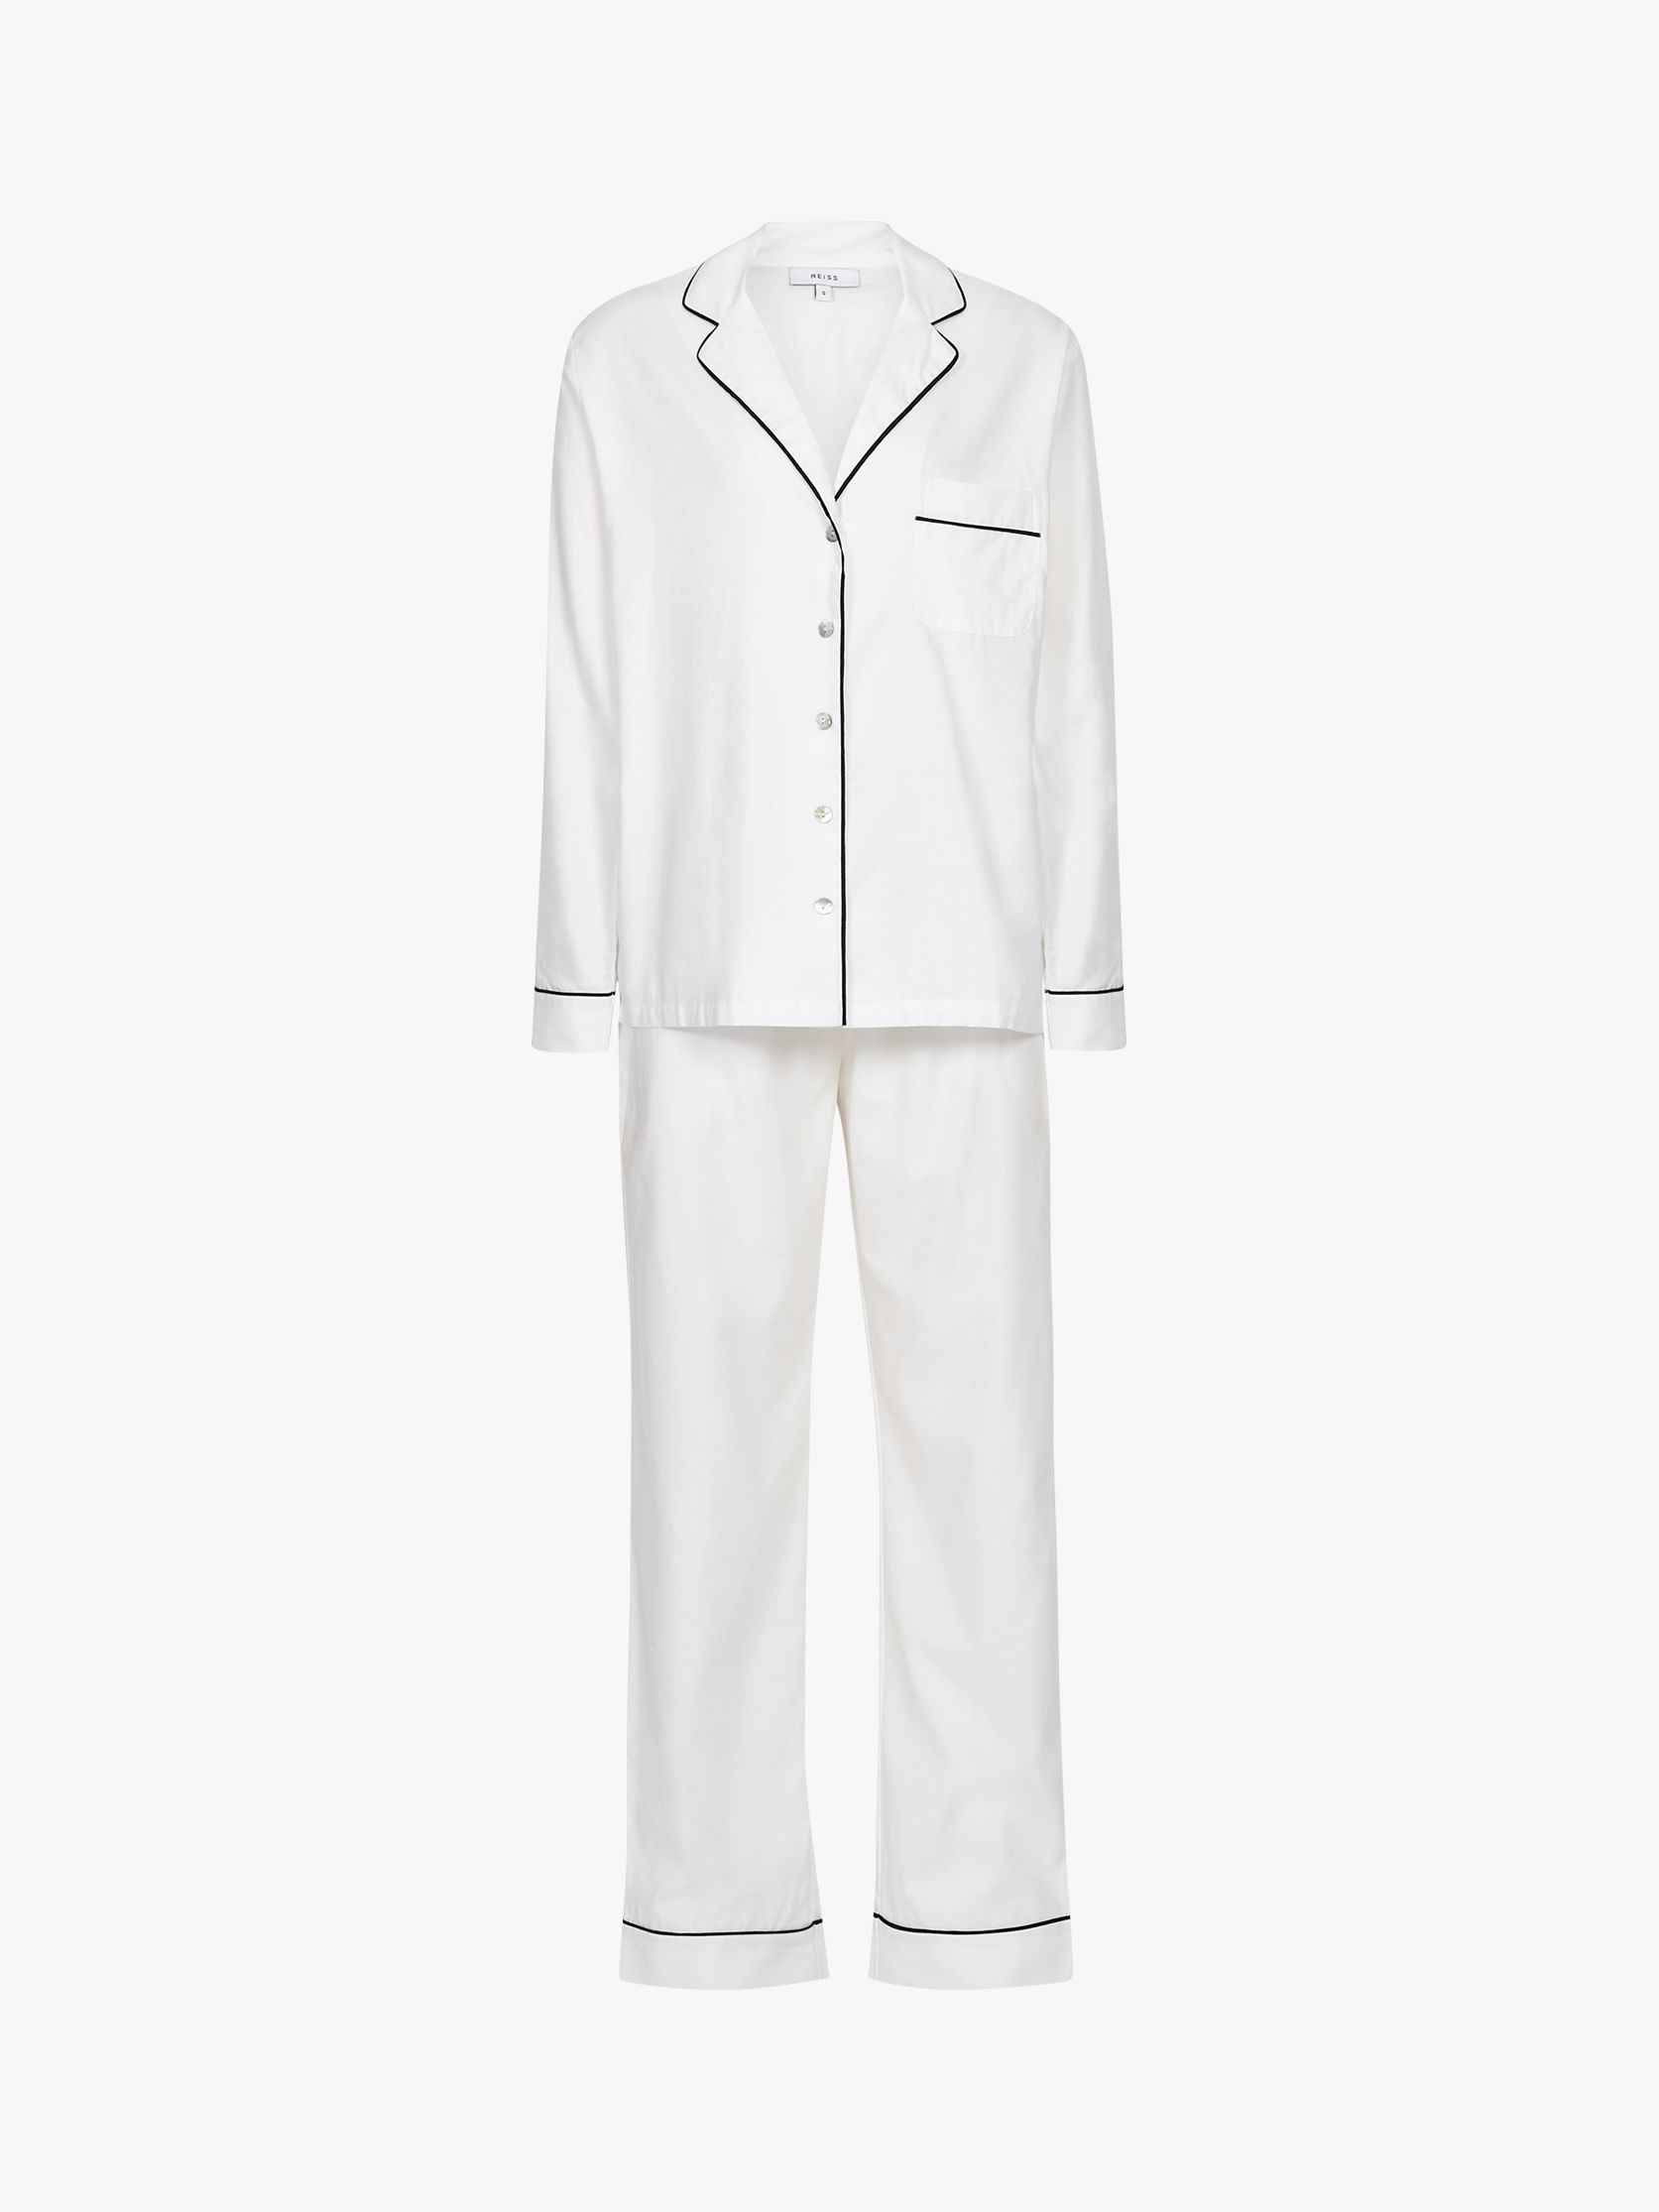 Reiss Charley Pyjama Top and Trousers Set, White